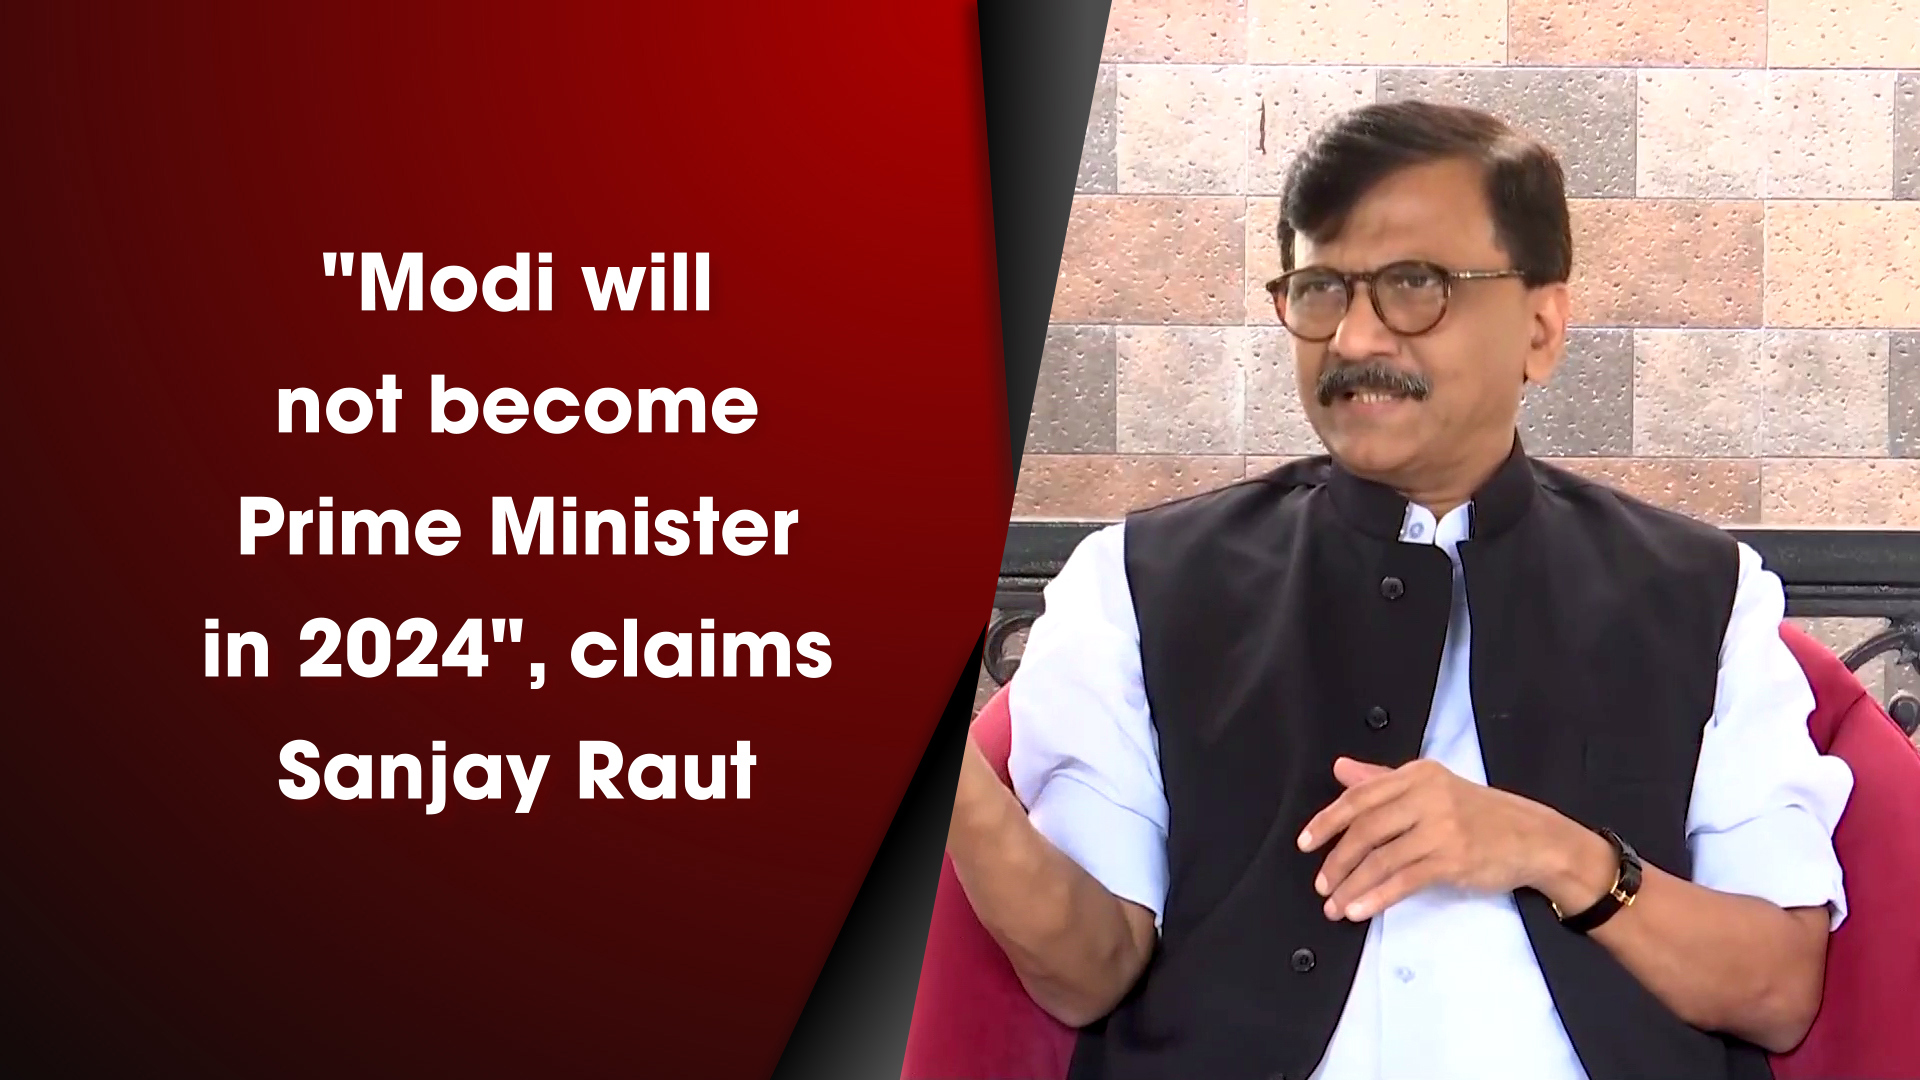 "Modi will not Prime Minister in 2024", claims Sanjay Raut